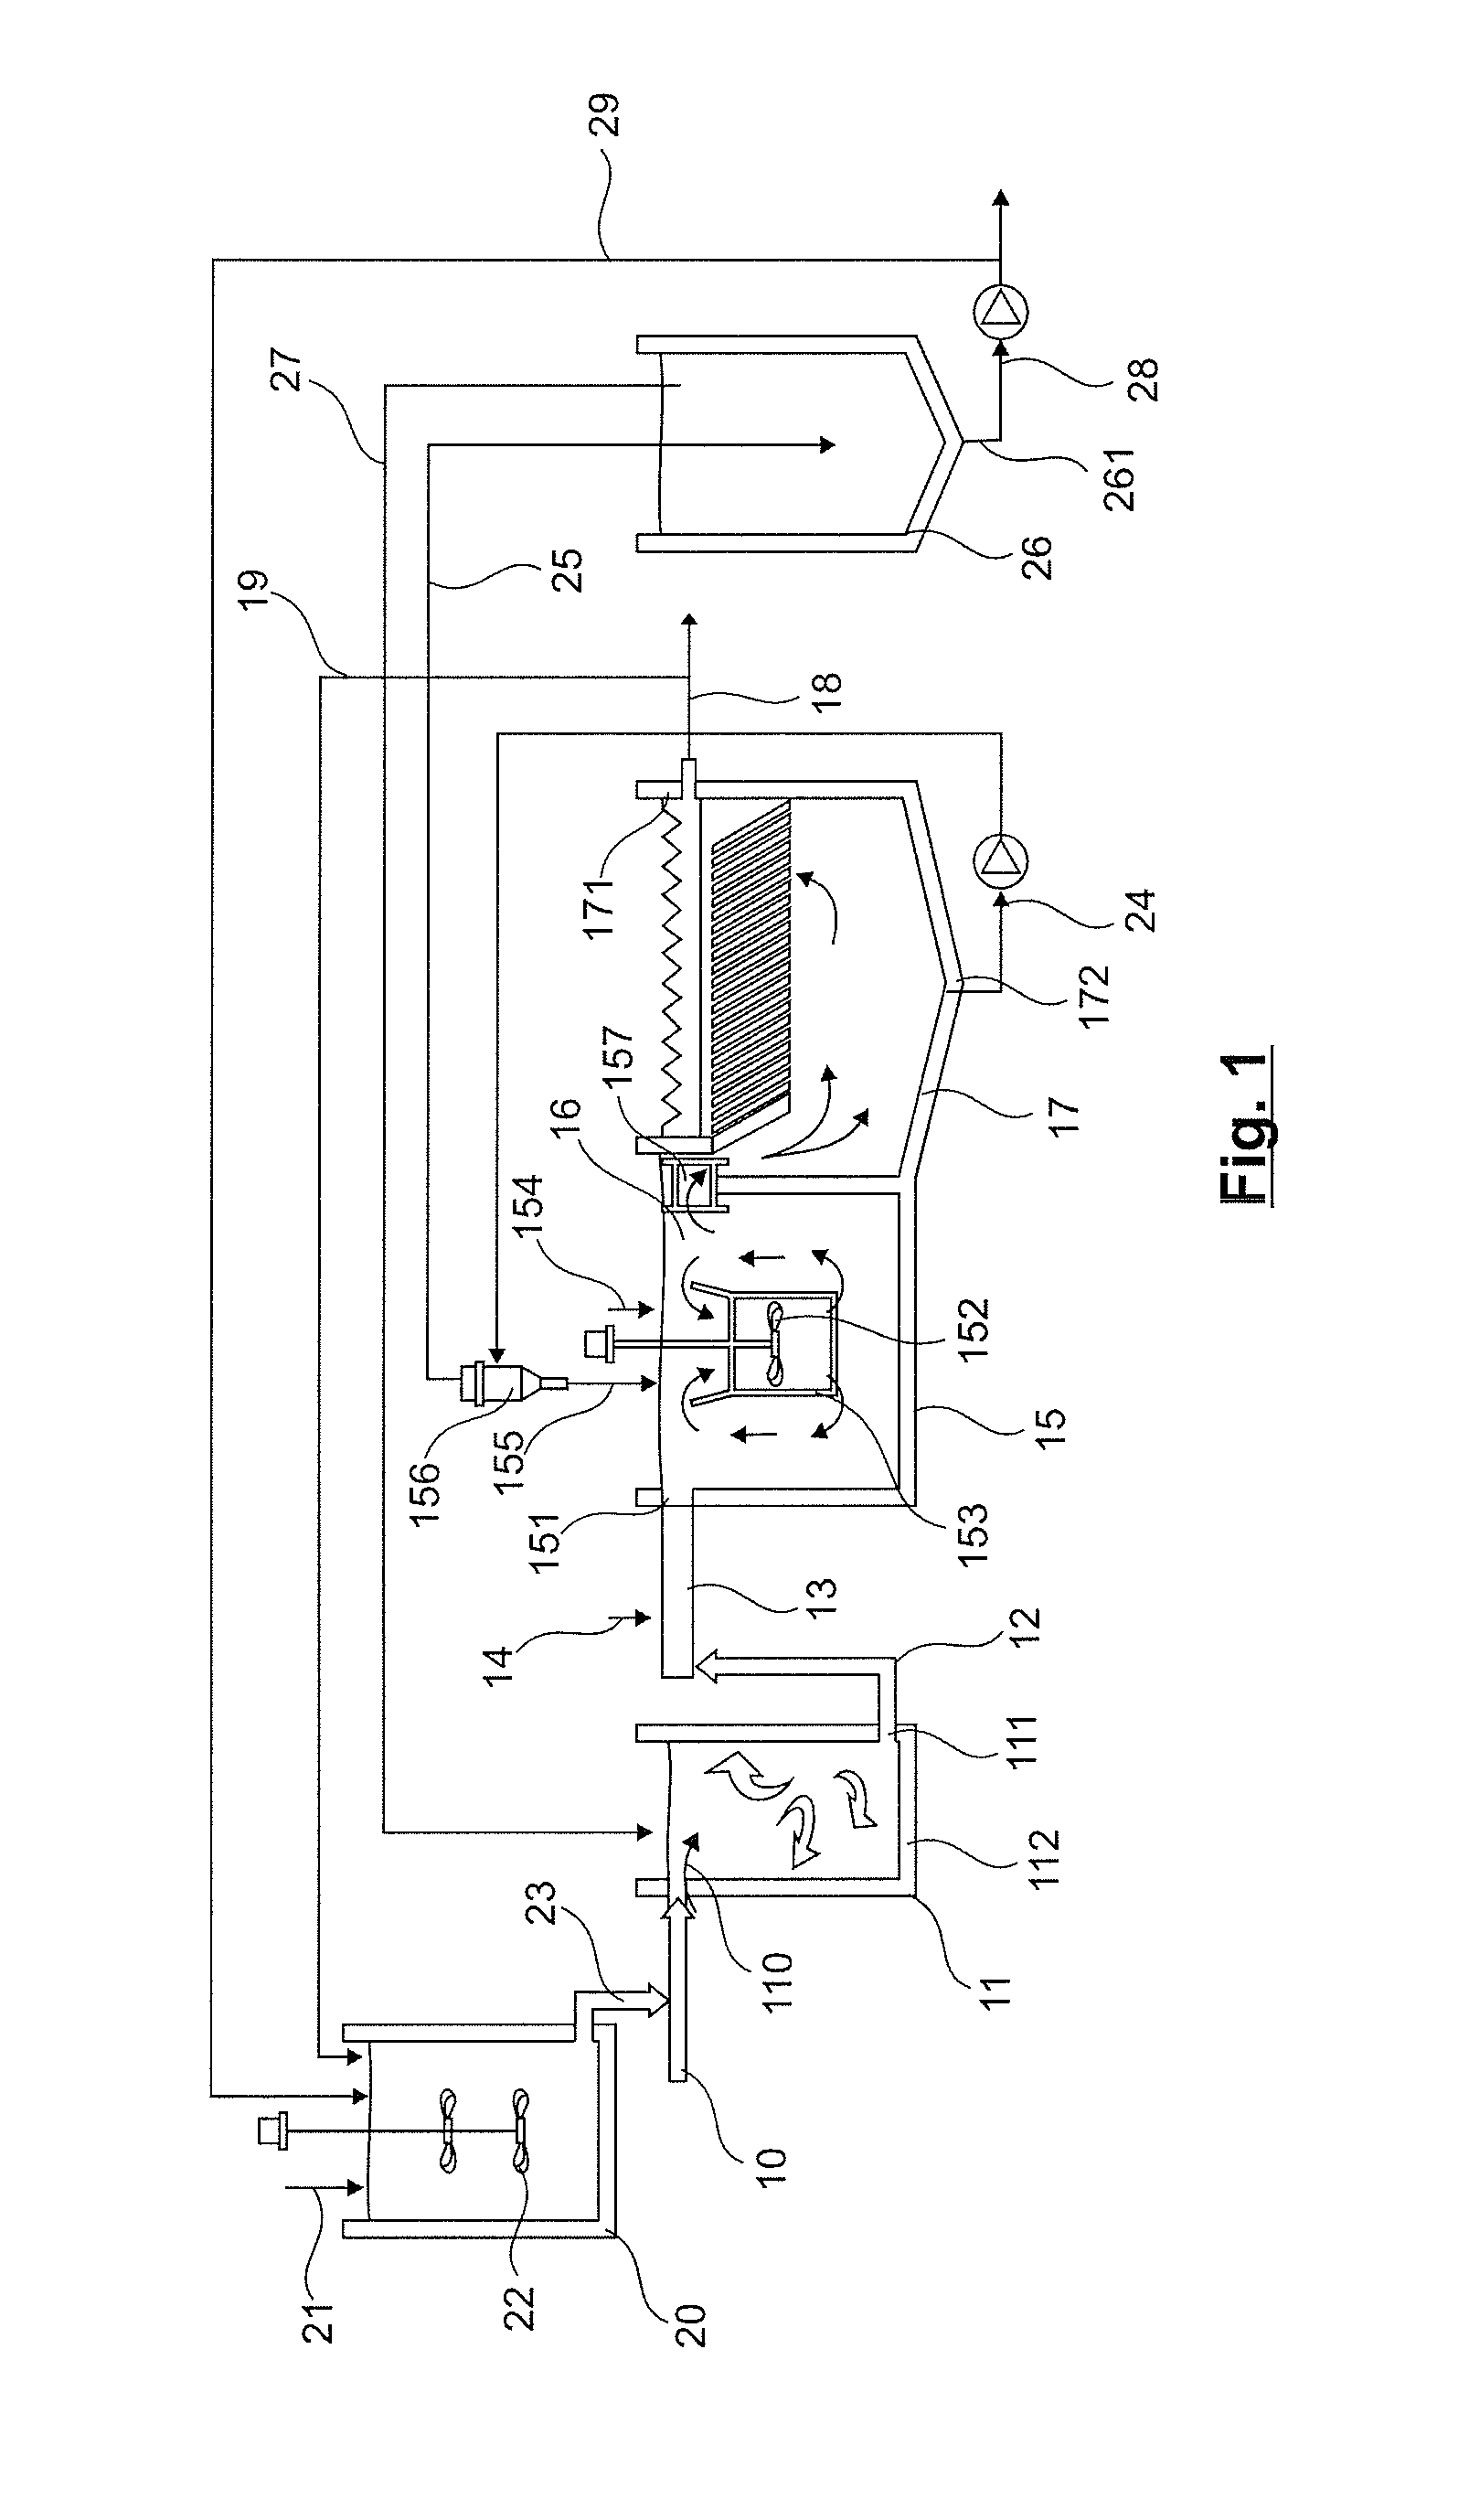 Process for Treating Water to be Treated by Clarification Comprising an Adsorption of a Portion of Clarified Water and a Clarification of a Mixture of Adsorbed Clarified Water and Water to be Treated